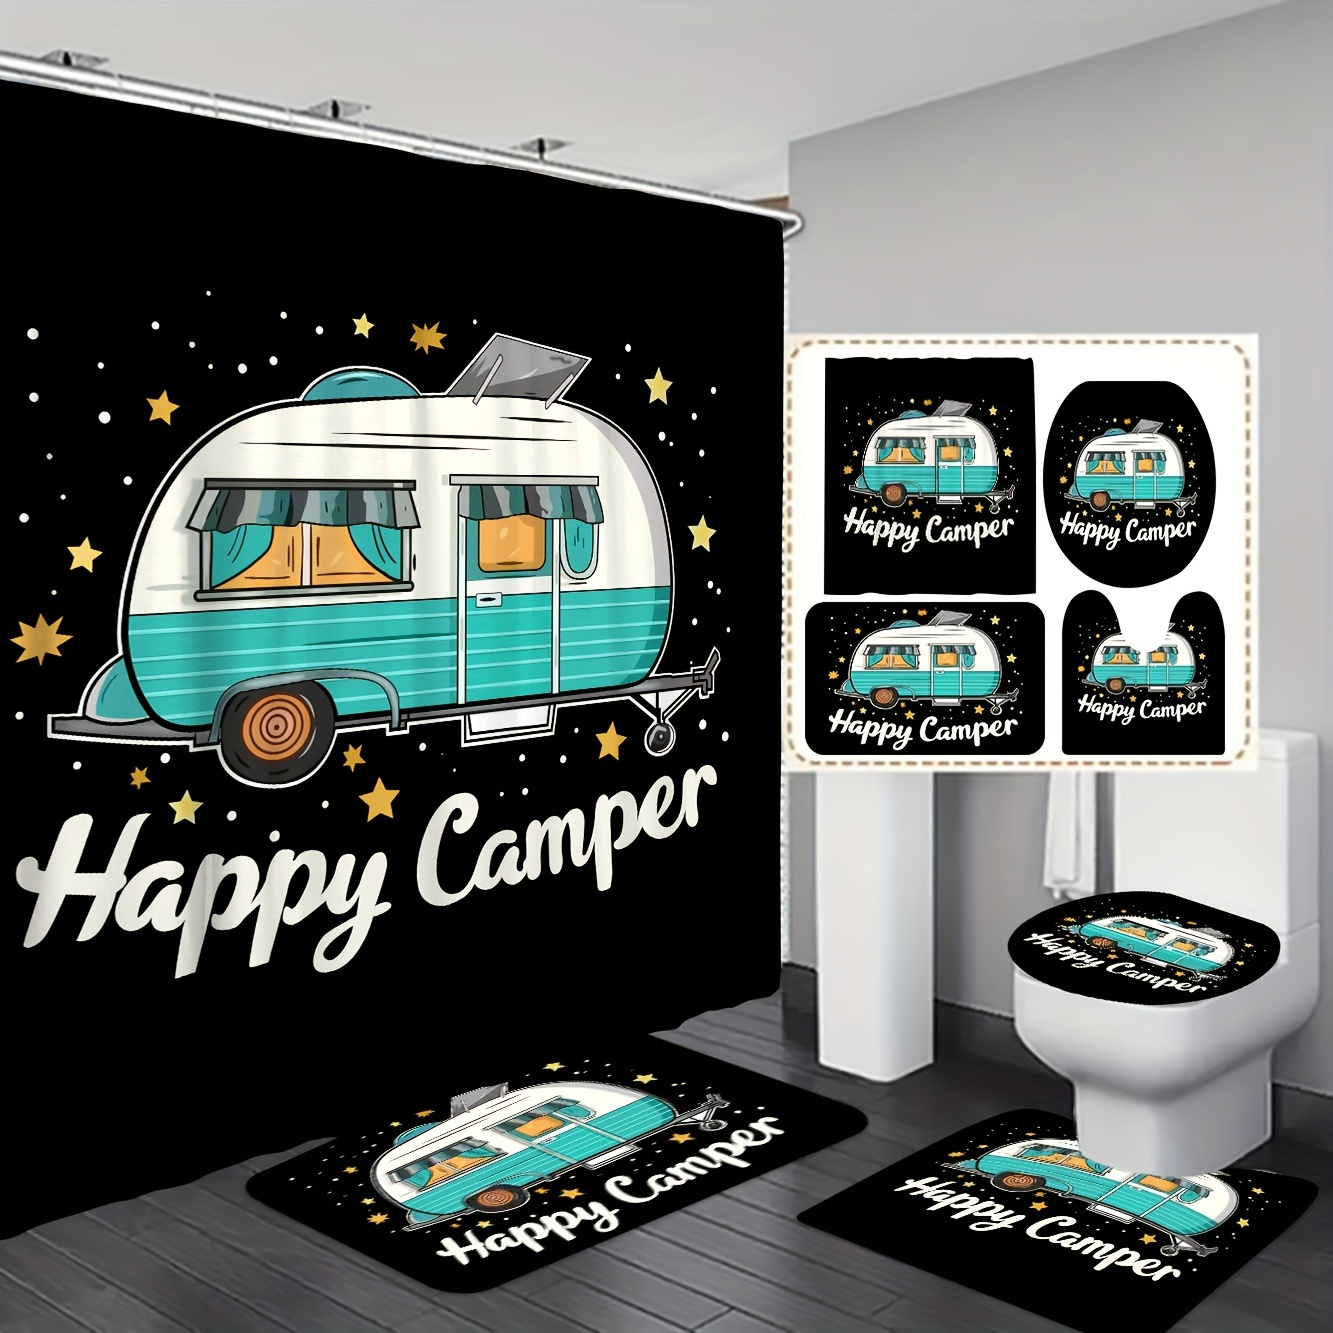 

Rv & Motorhome Shower Curtain Set With Blue Camper Bus Design - Fade-resistant Polyester, Hooks Included - Perfect For Campers And Small Bathrooms - Available In 1pc, 3pcs, Or 4pcs Sets